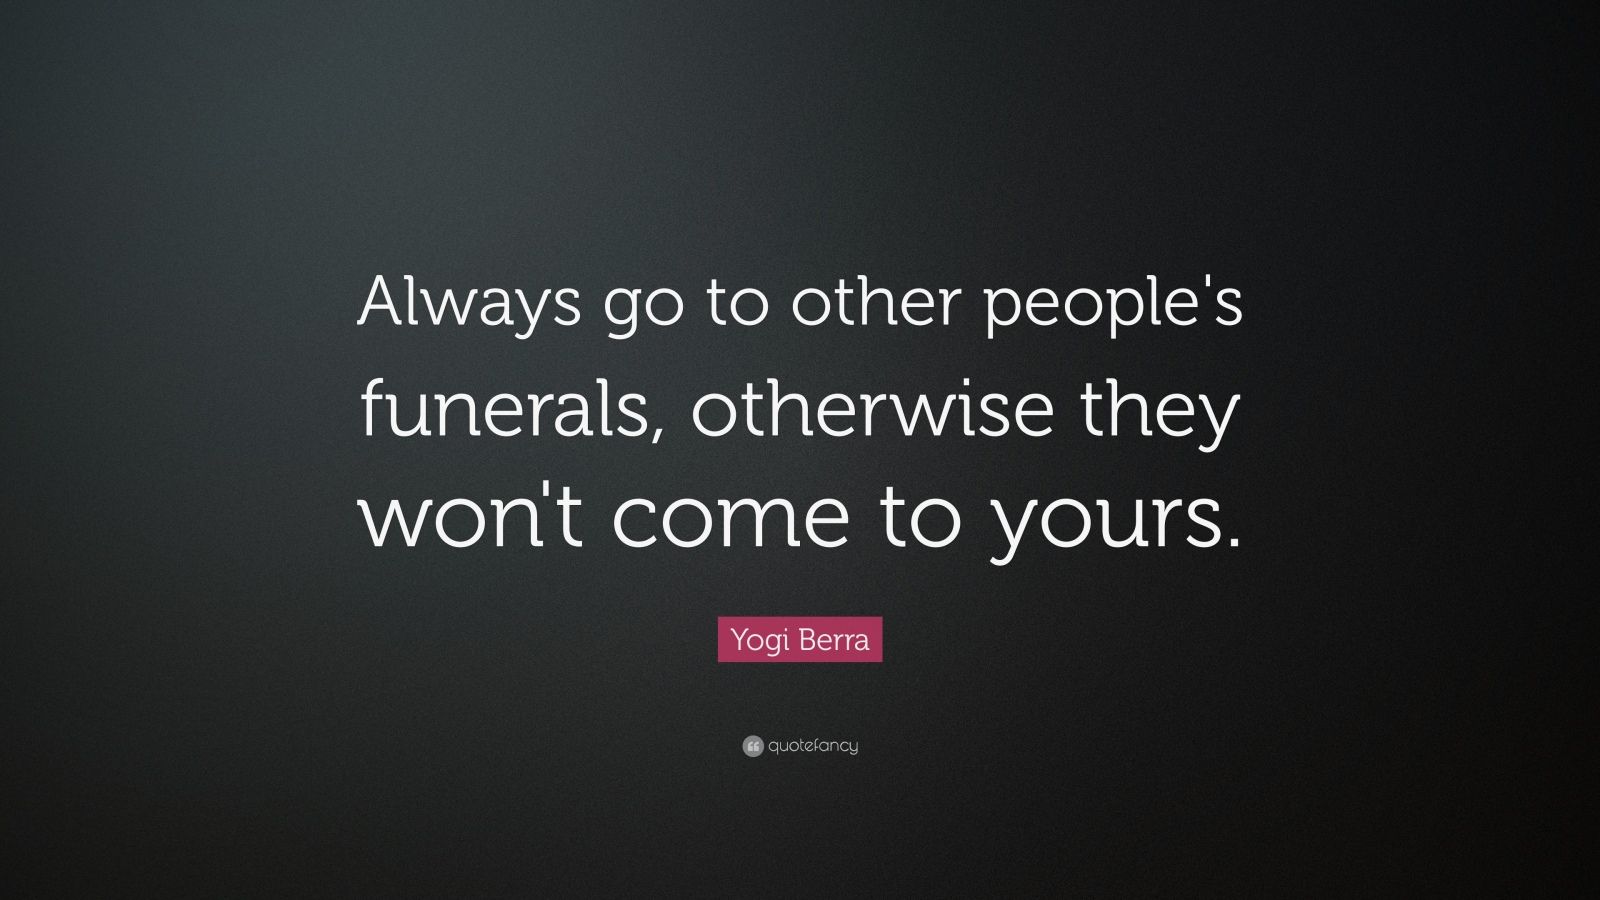 Always go to other people's funerals, otherwise they won't come to yours YOGI  BERRA.